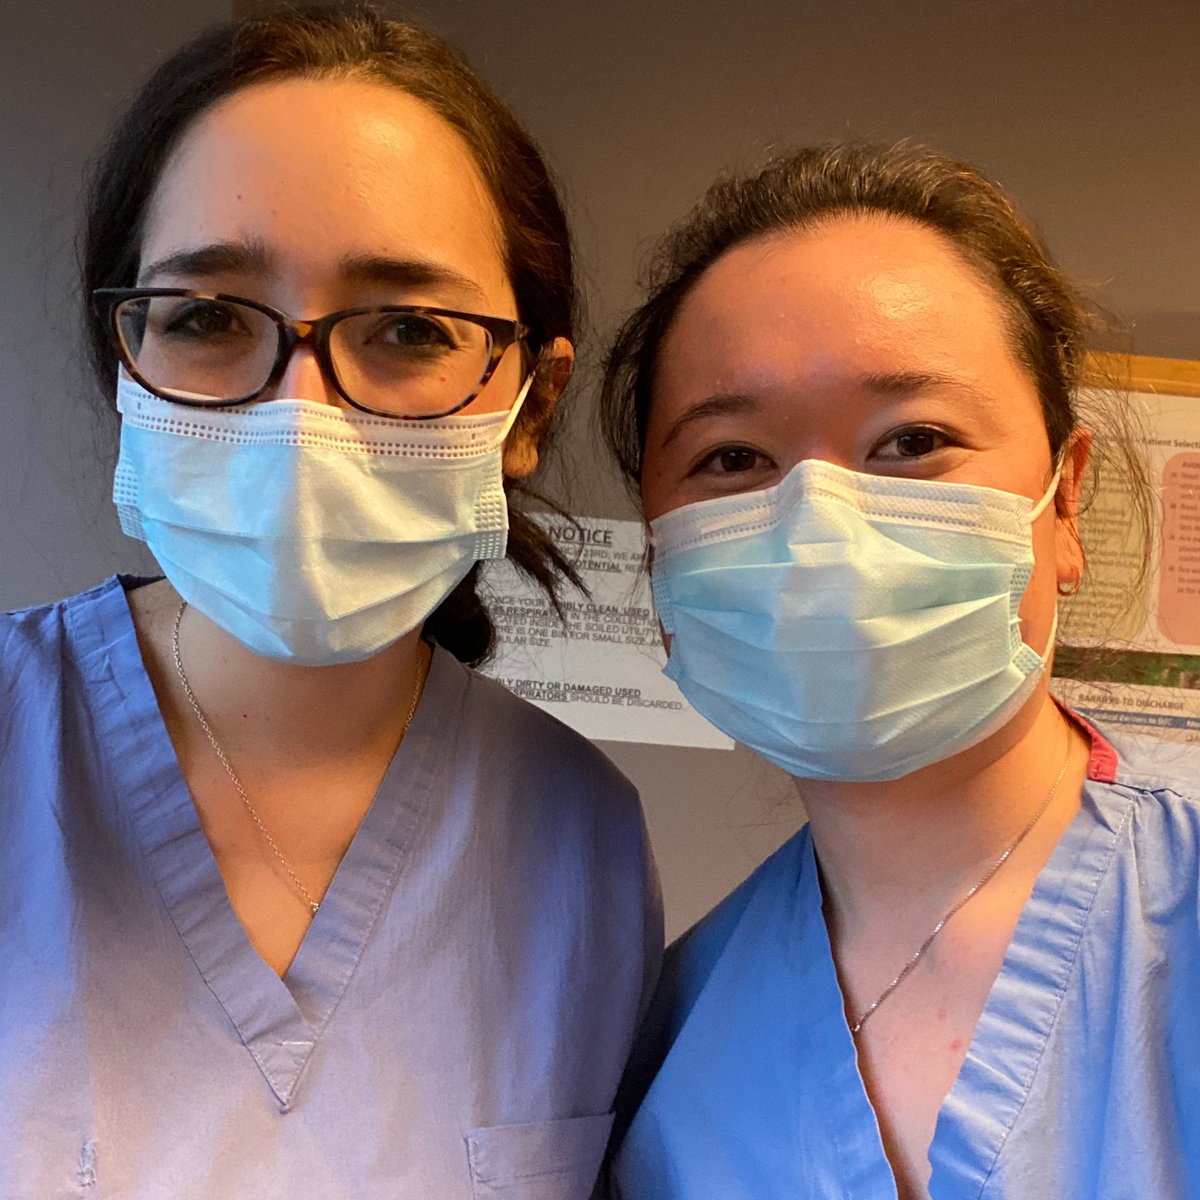 1/10: My senior resident  @monikahye and I just finished a brief rotation on a COVID ward as part of the  #TigerTeam deployed to the wards as  @MGHMedicine addresses the surge of COVID + patients. The lights were bright, but we can only really summarize our experience as "wow!" ...